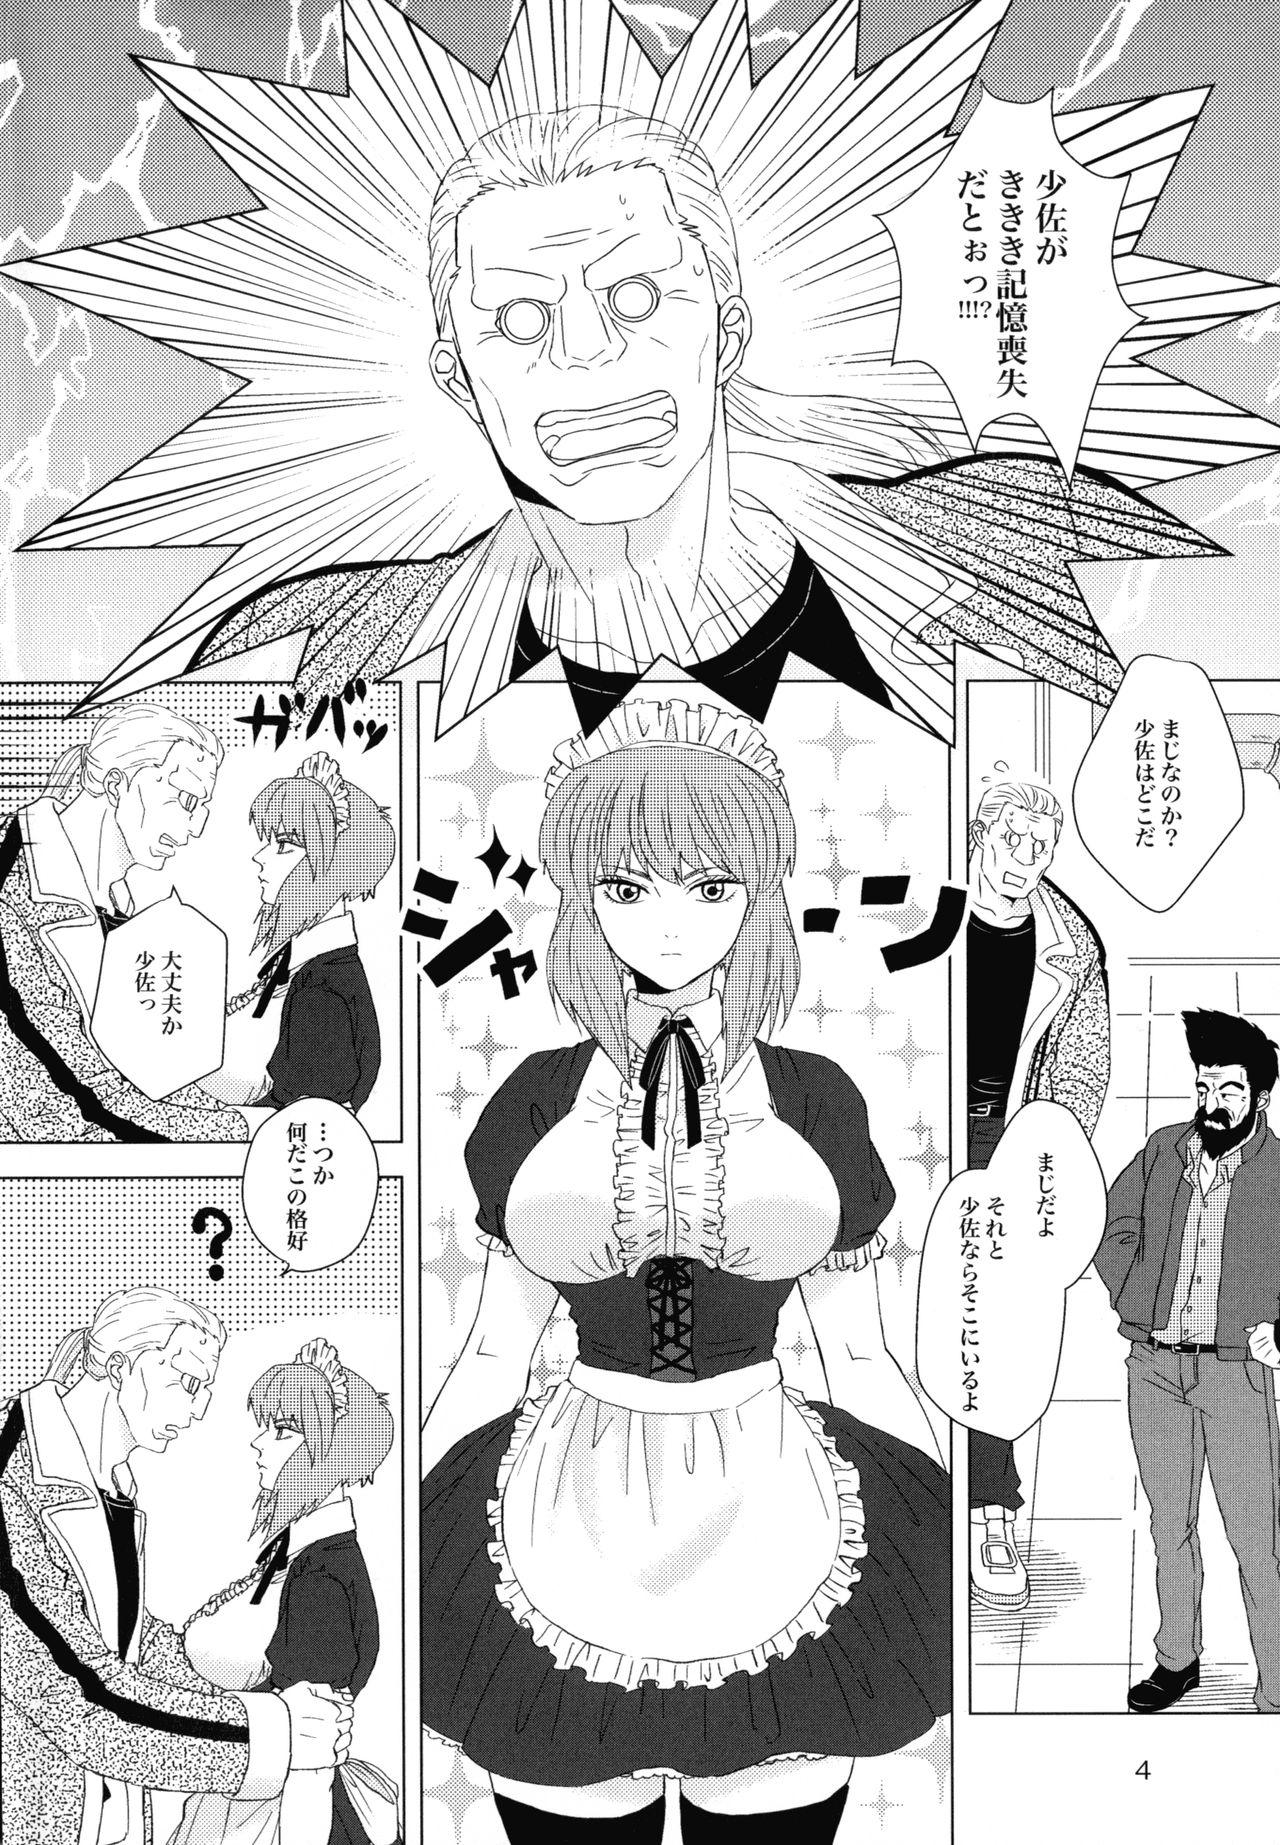 Safadinha FRENCHMAIDCOSTUME BTMT - Ghost in the shell Gay Kissing - Page 4